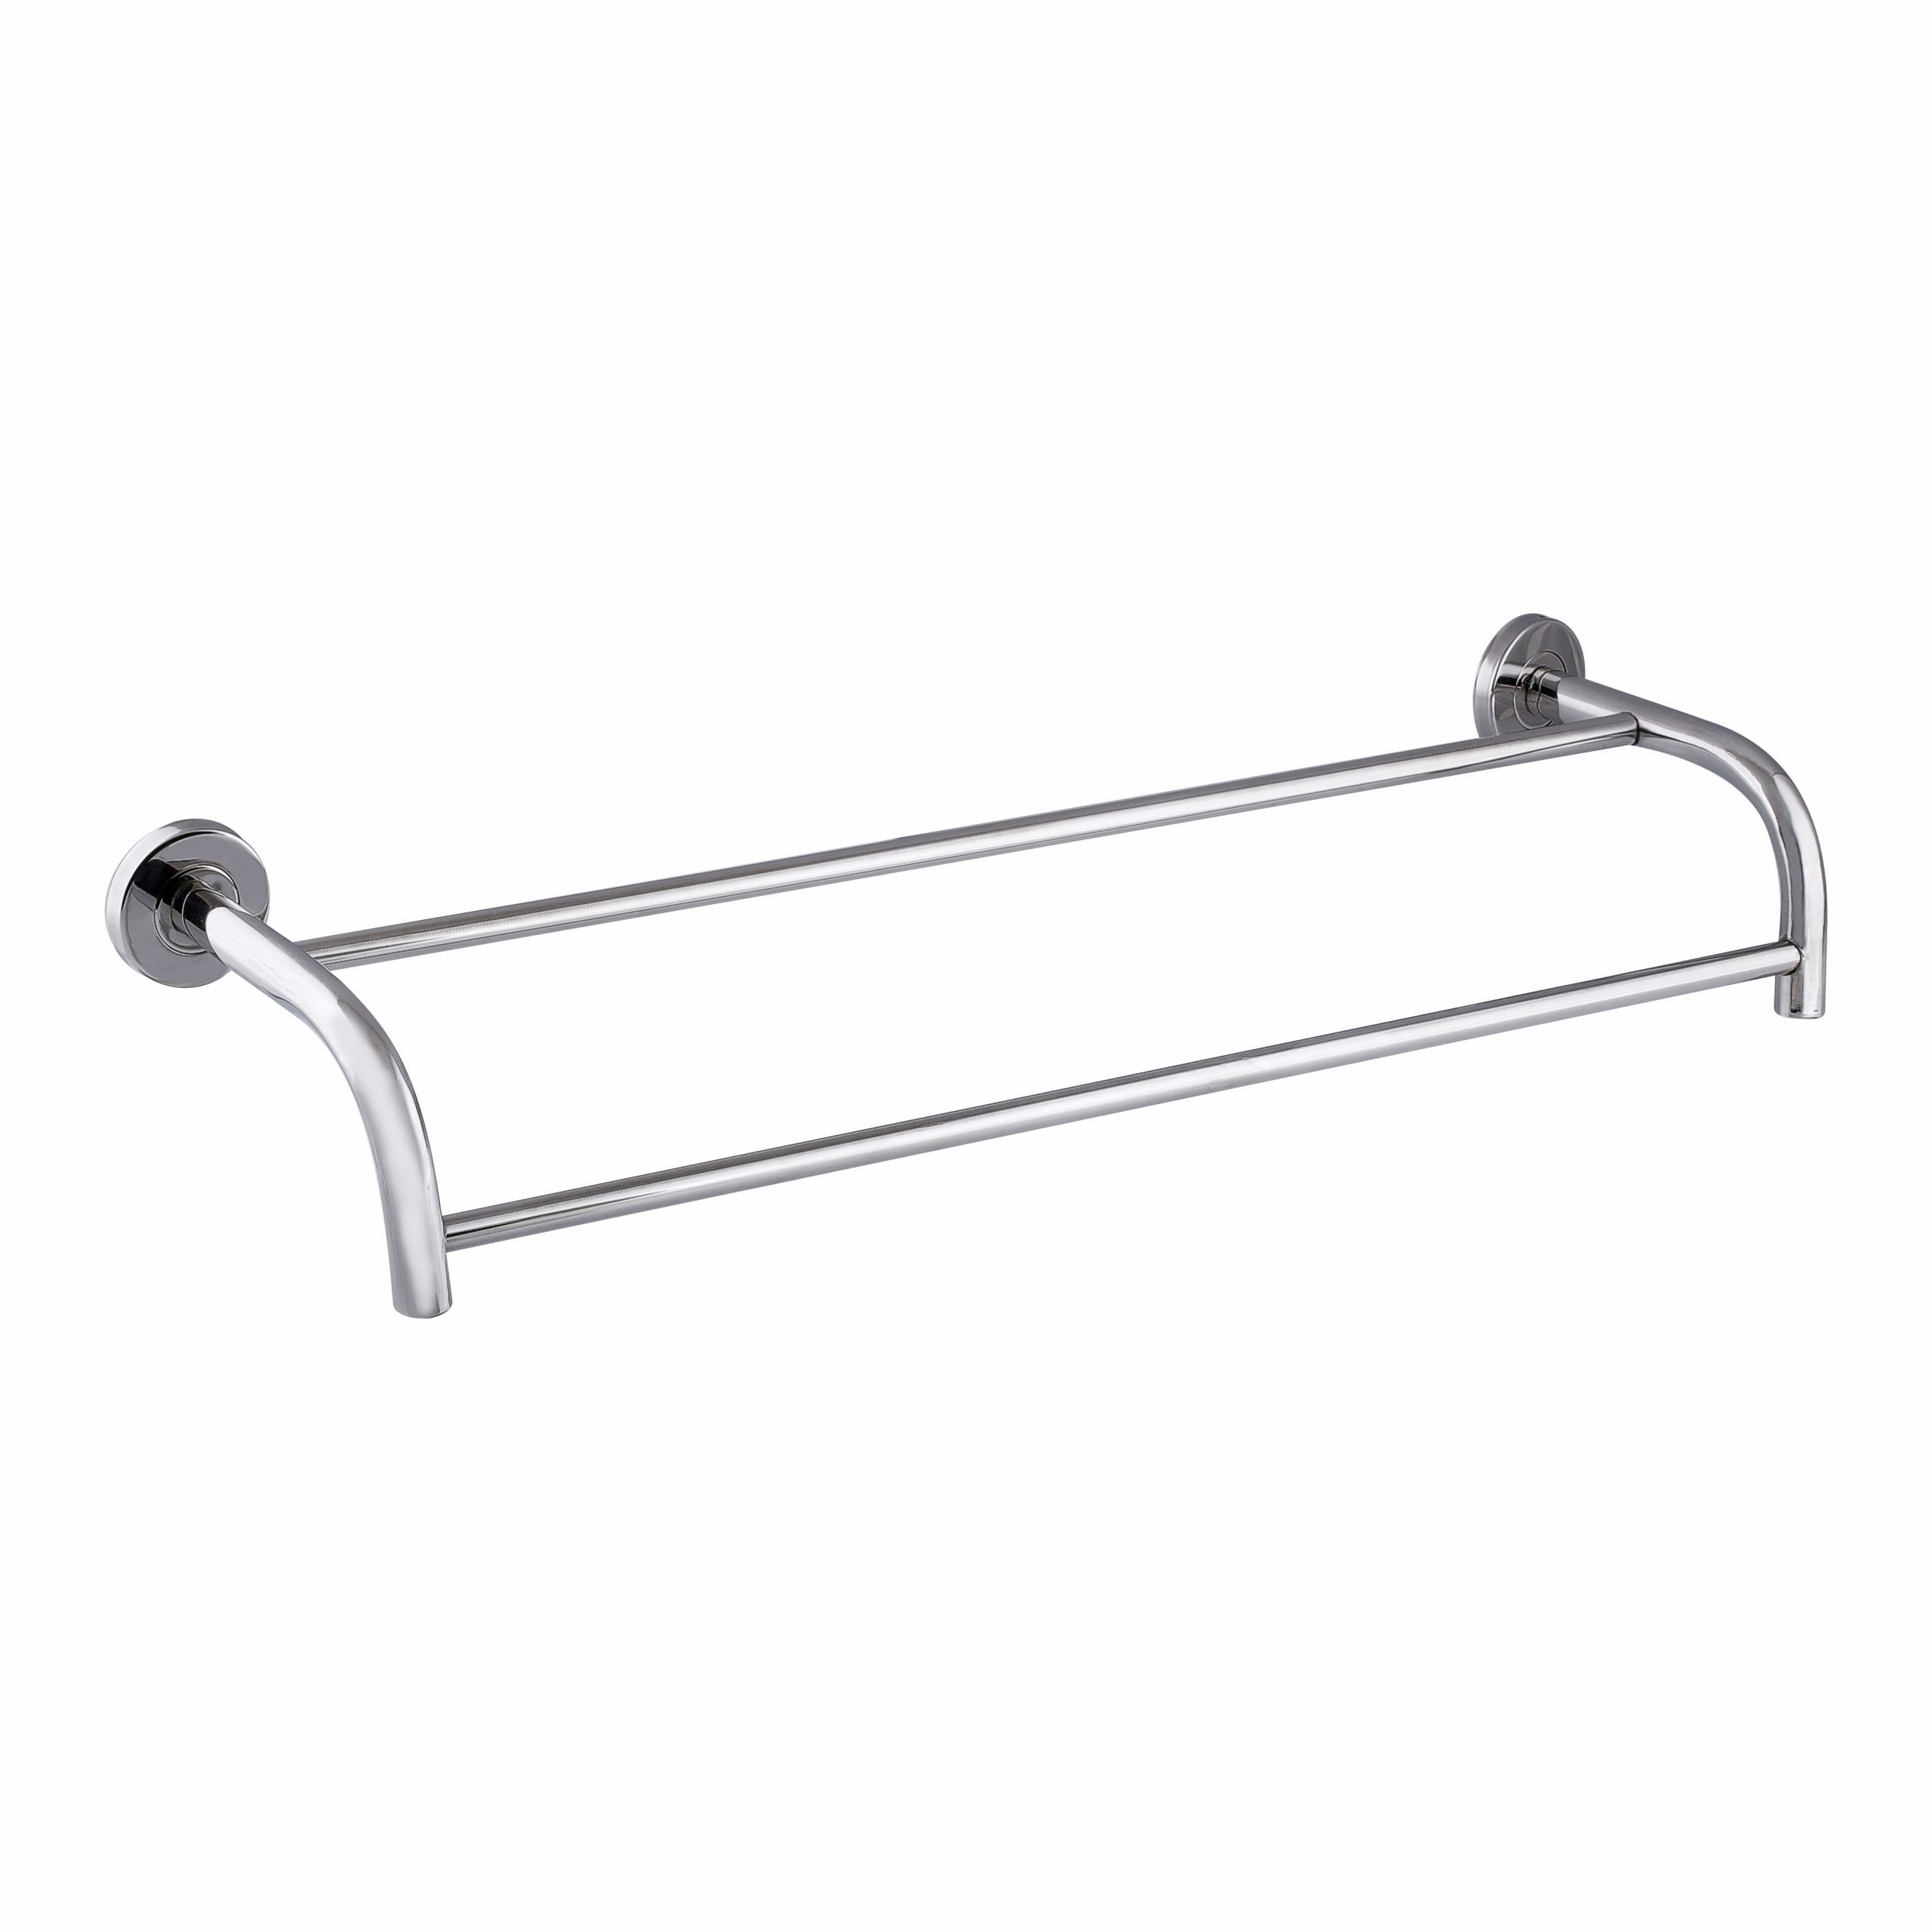 Stainless Steel Double Rod Towel Holder (24 Inch, Silver)